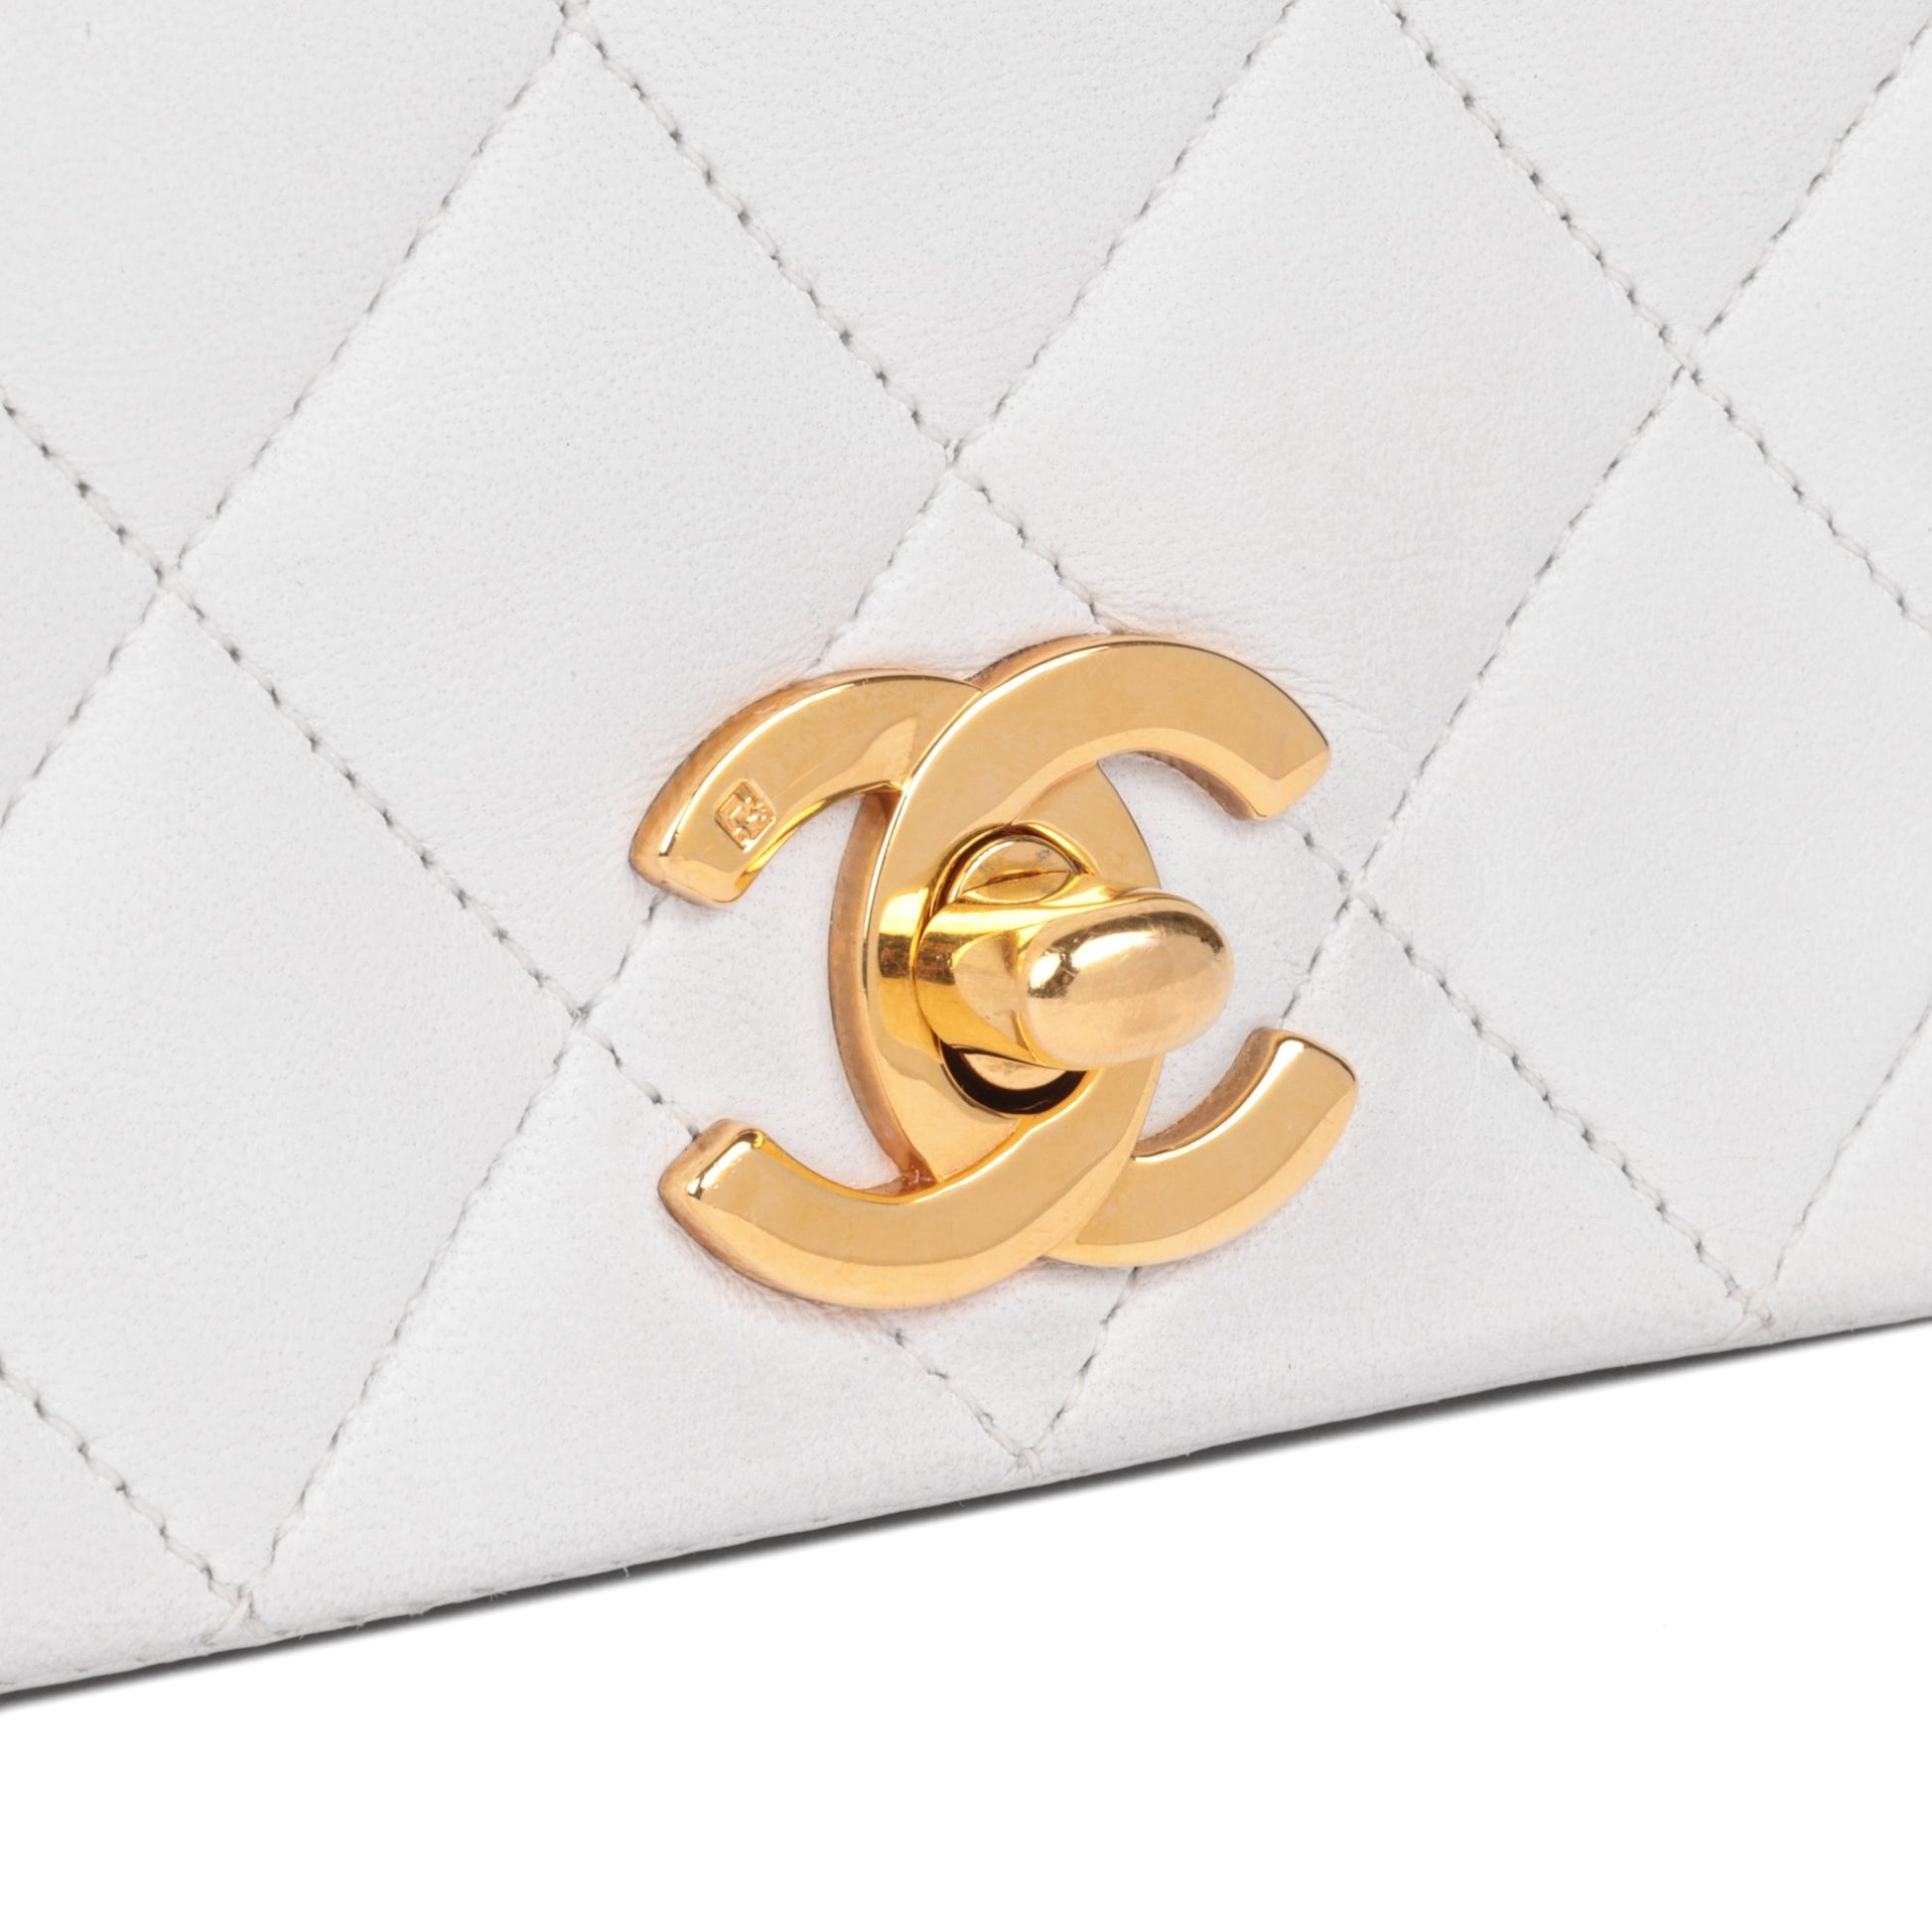 Chanel Flap Bag White - 148 For Sale on 1stDibs